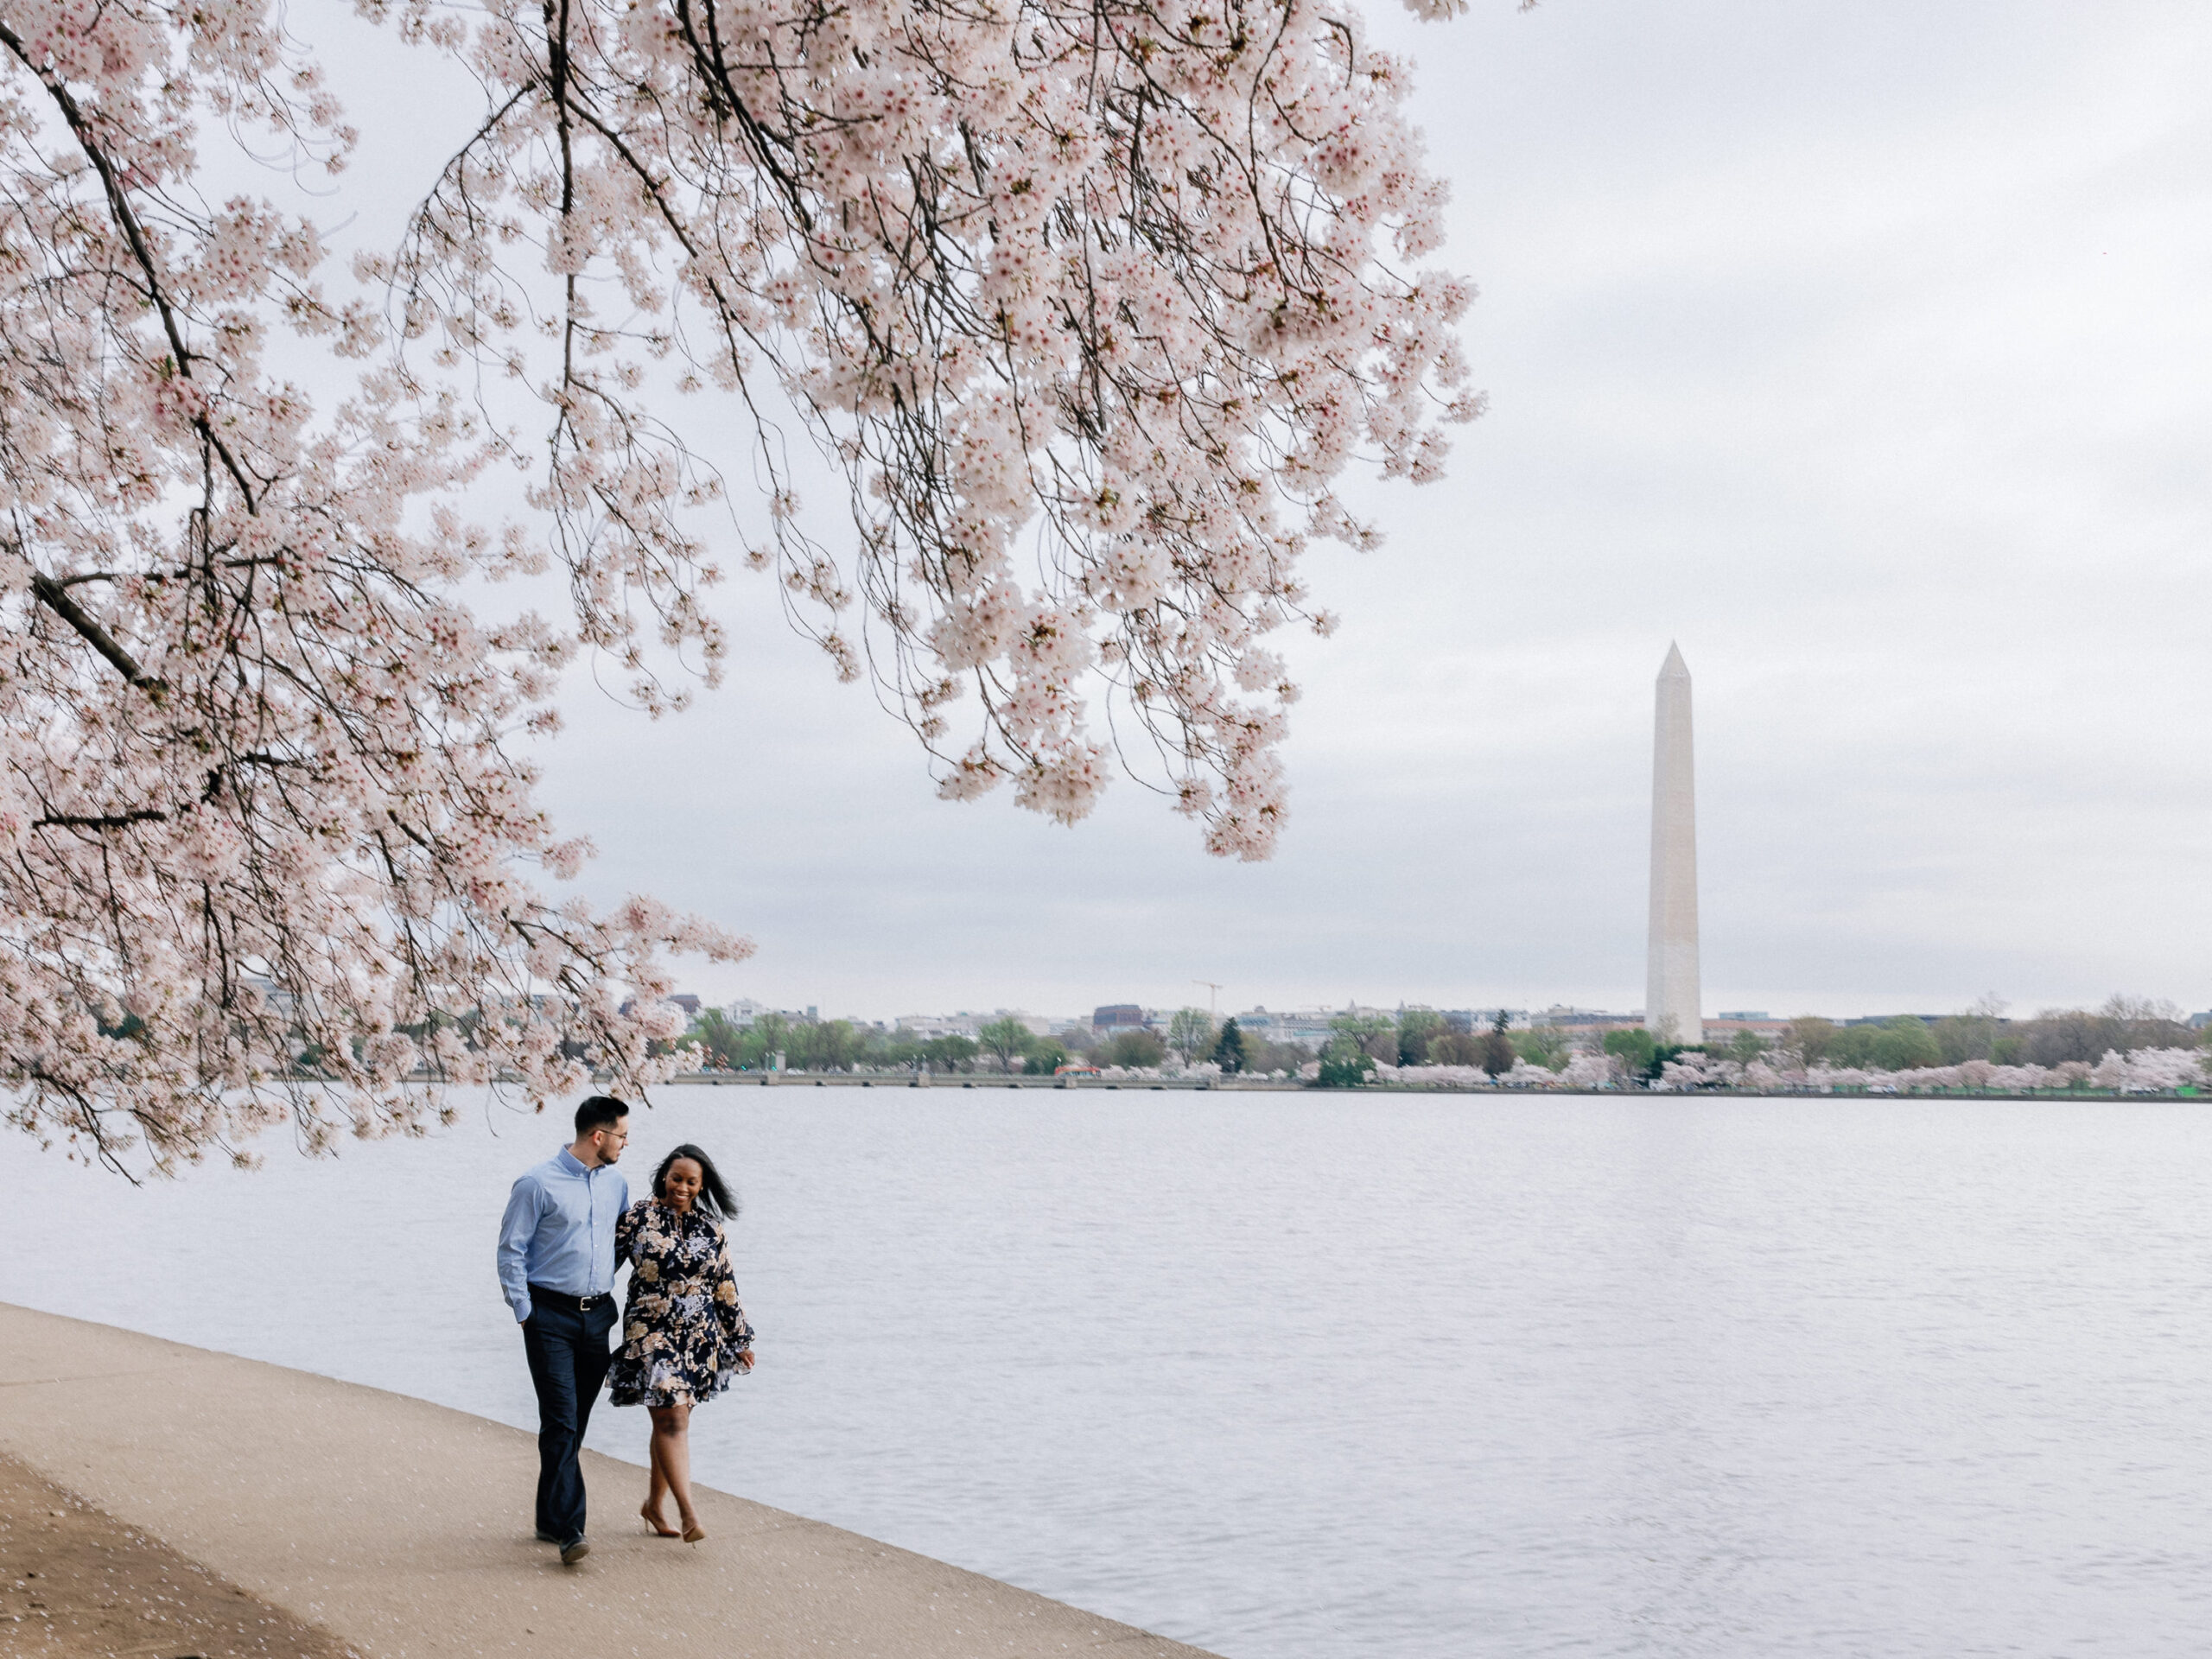 A newly engaged couple walking hand in hand along the edge of the DC Tidal Basin during the cherry blossom bloom.